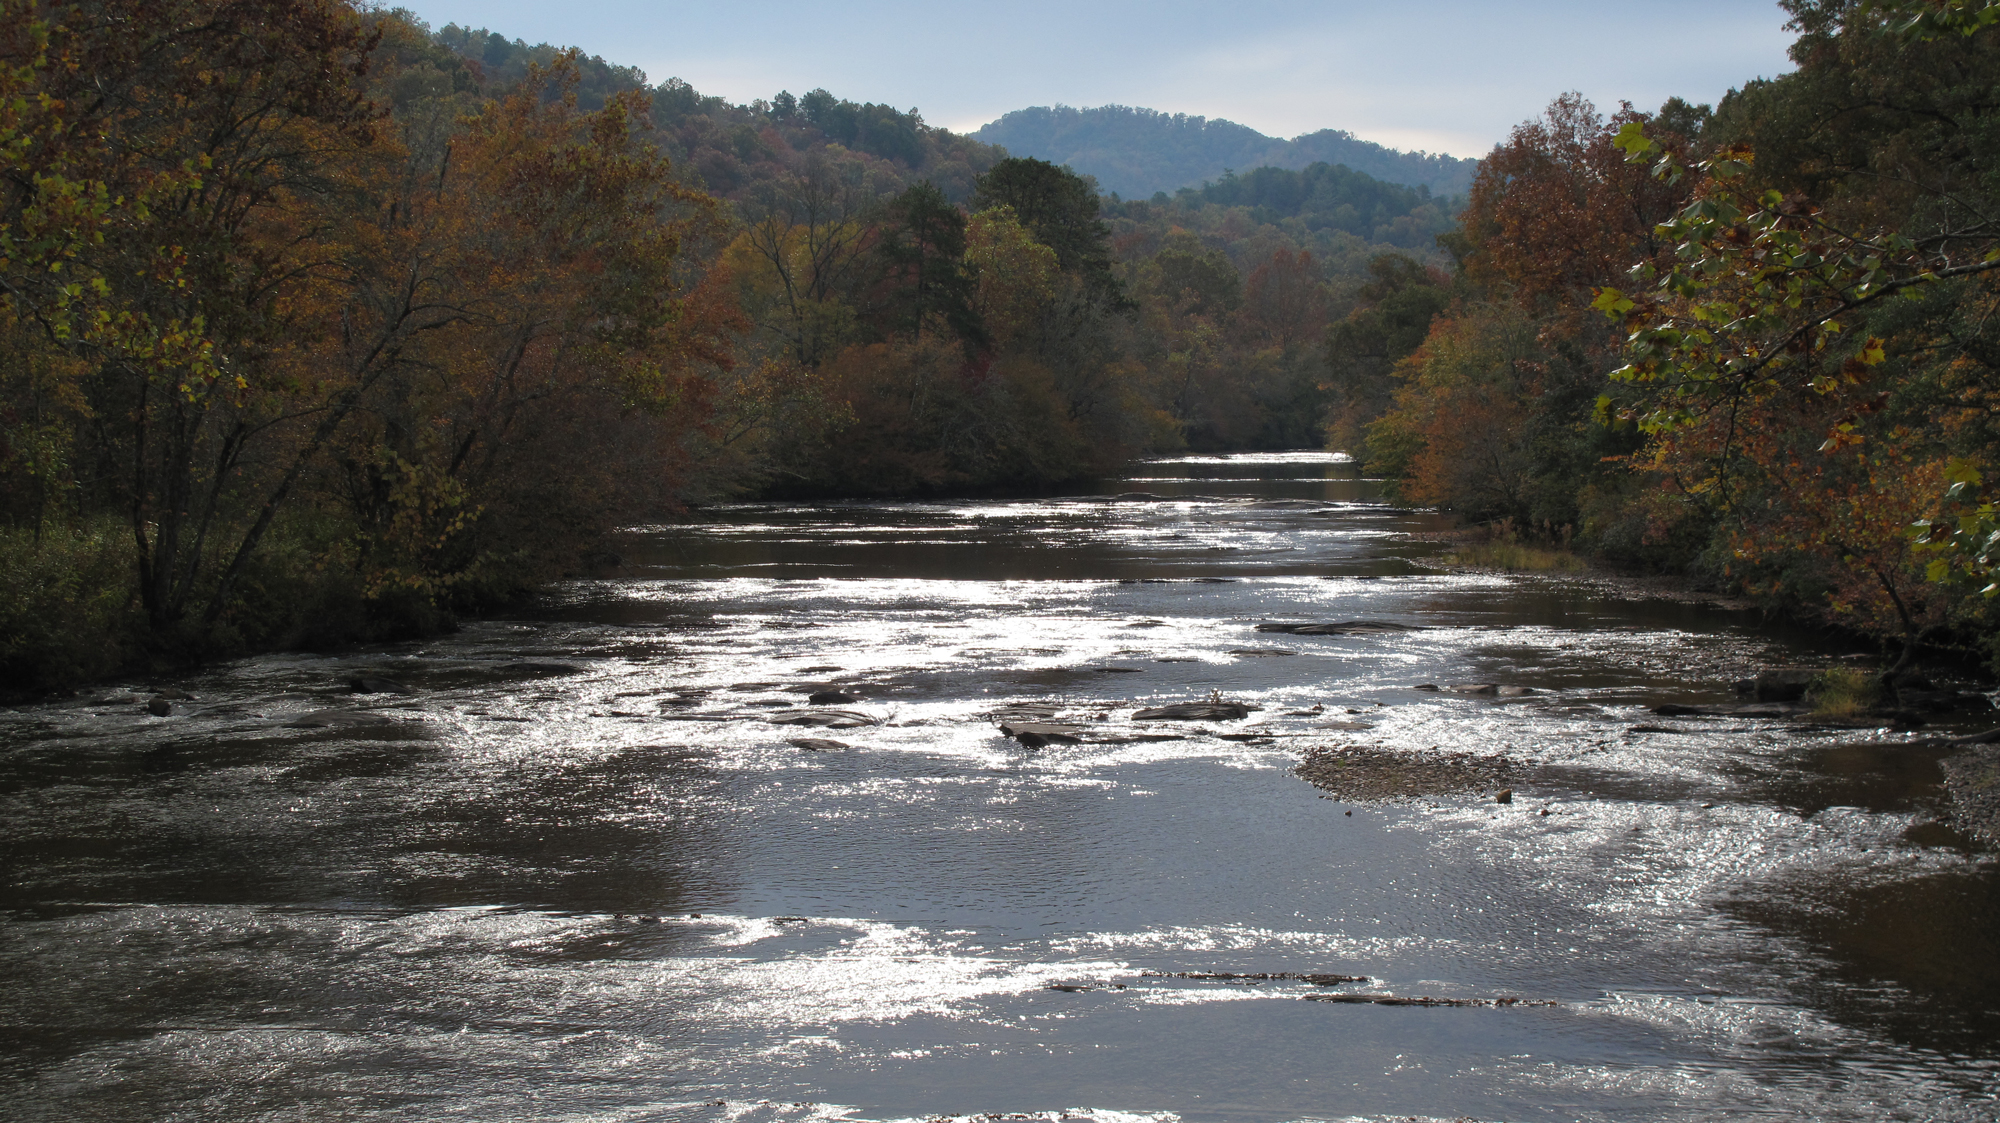 Little Tennessee River. Photo © U.S. Fish and Wildlife Service Southeast Region / Flickr through a Creative Commons license